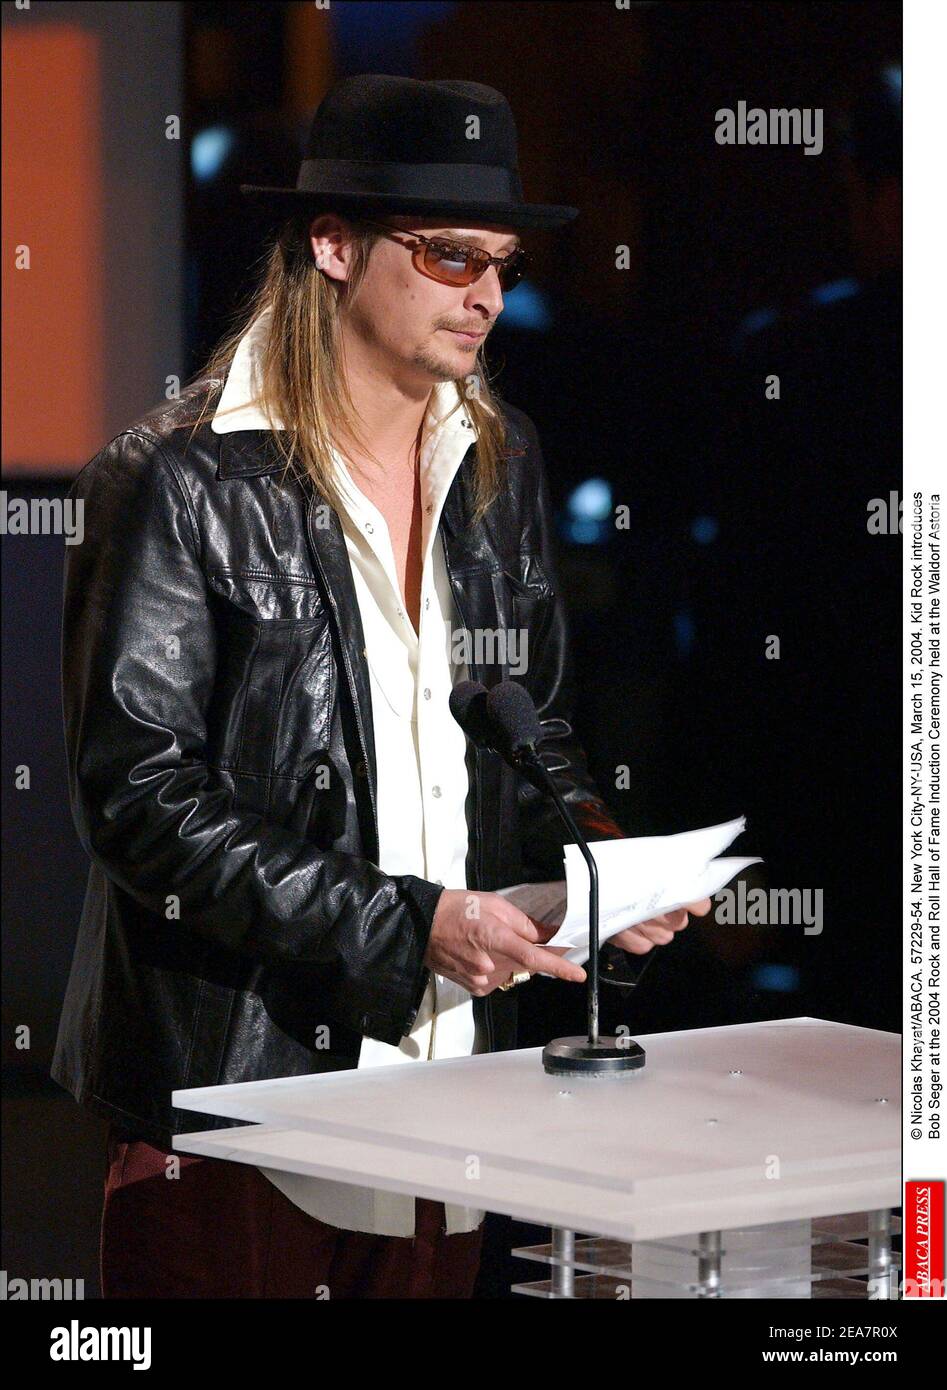 Kid Rock introduces Bob Seger at the 2004 Rock and Roll Hall of Fame Induction Ceremony held at the Waldorf Astoria in New York, on Monday, March 15, 2004. (Pictured : Kid Rock). Photo by Nicolas Khayat/ABACA. Stock Photo